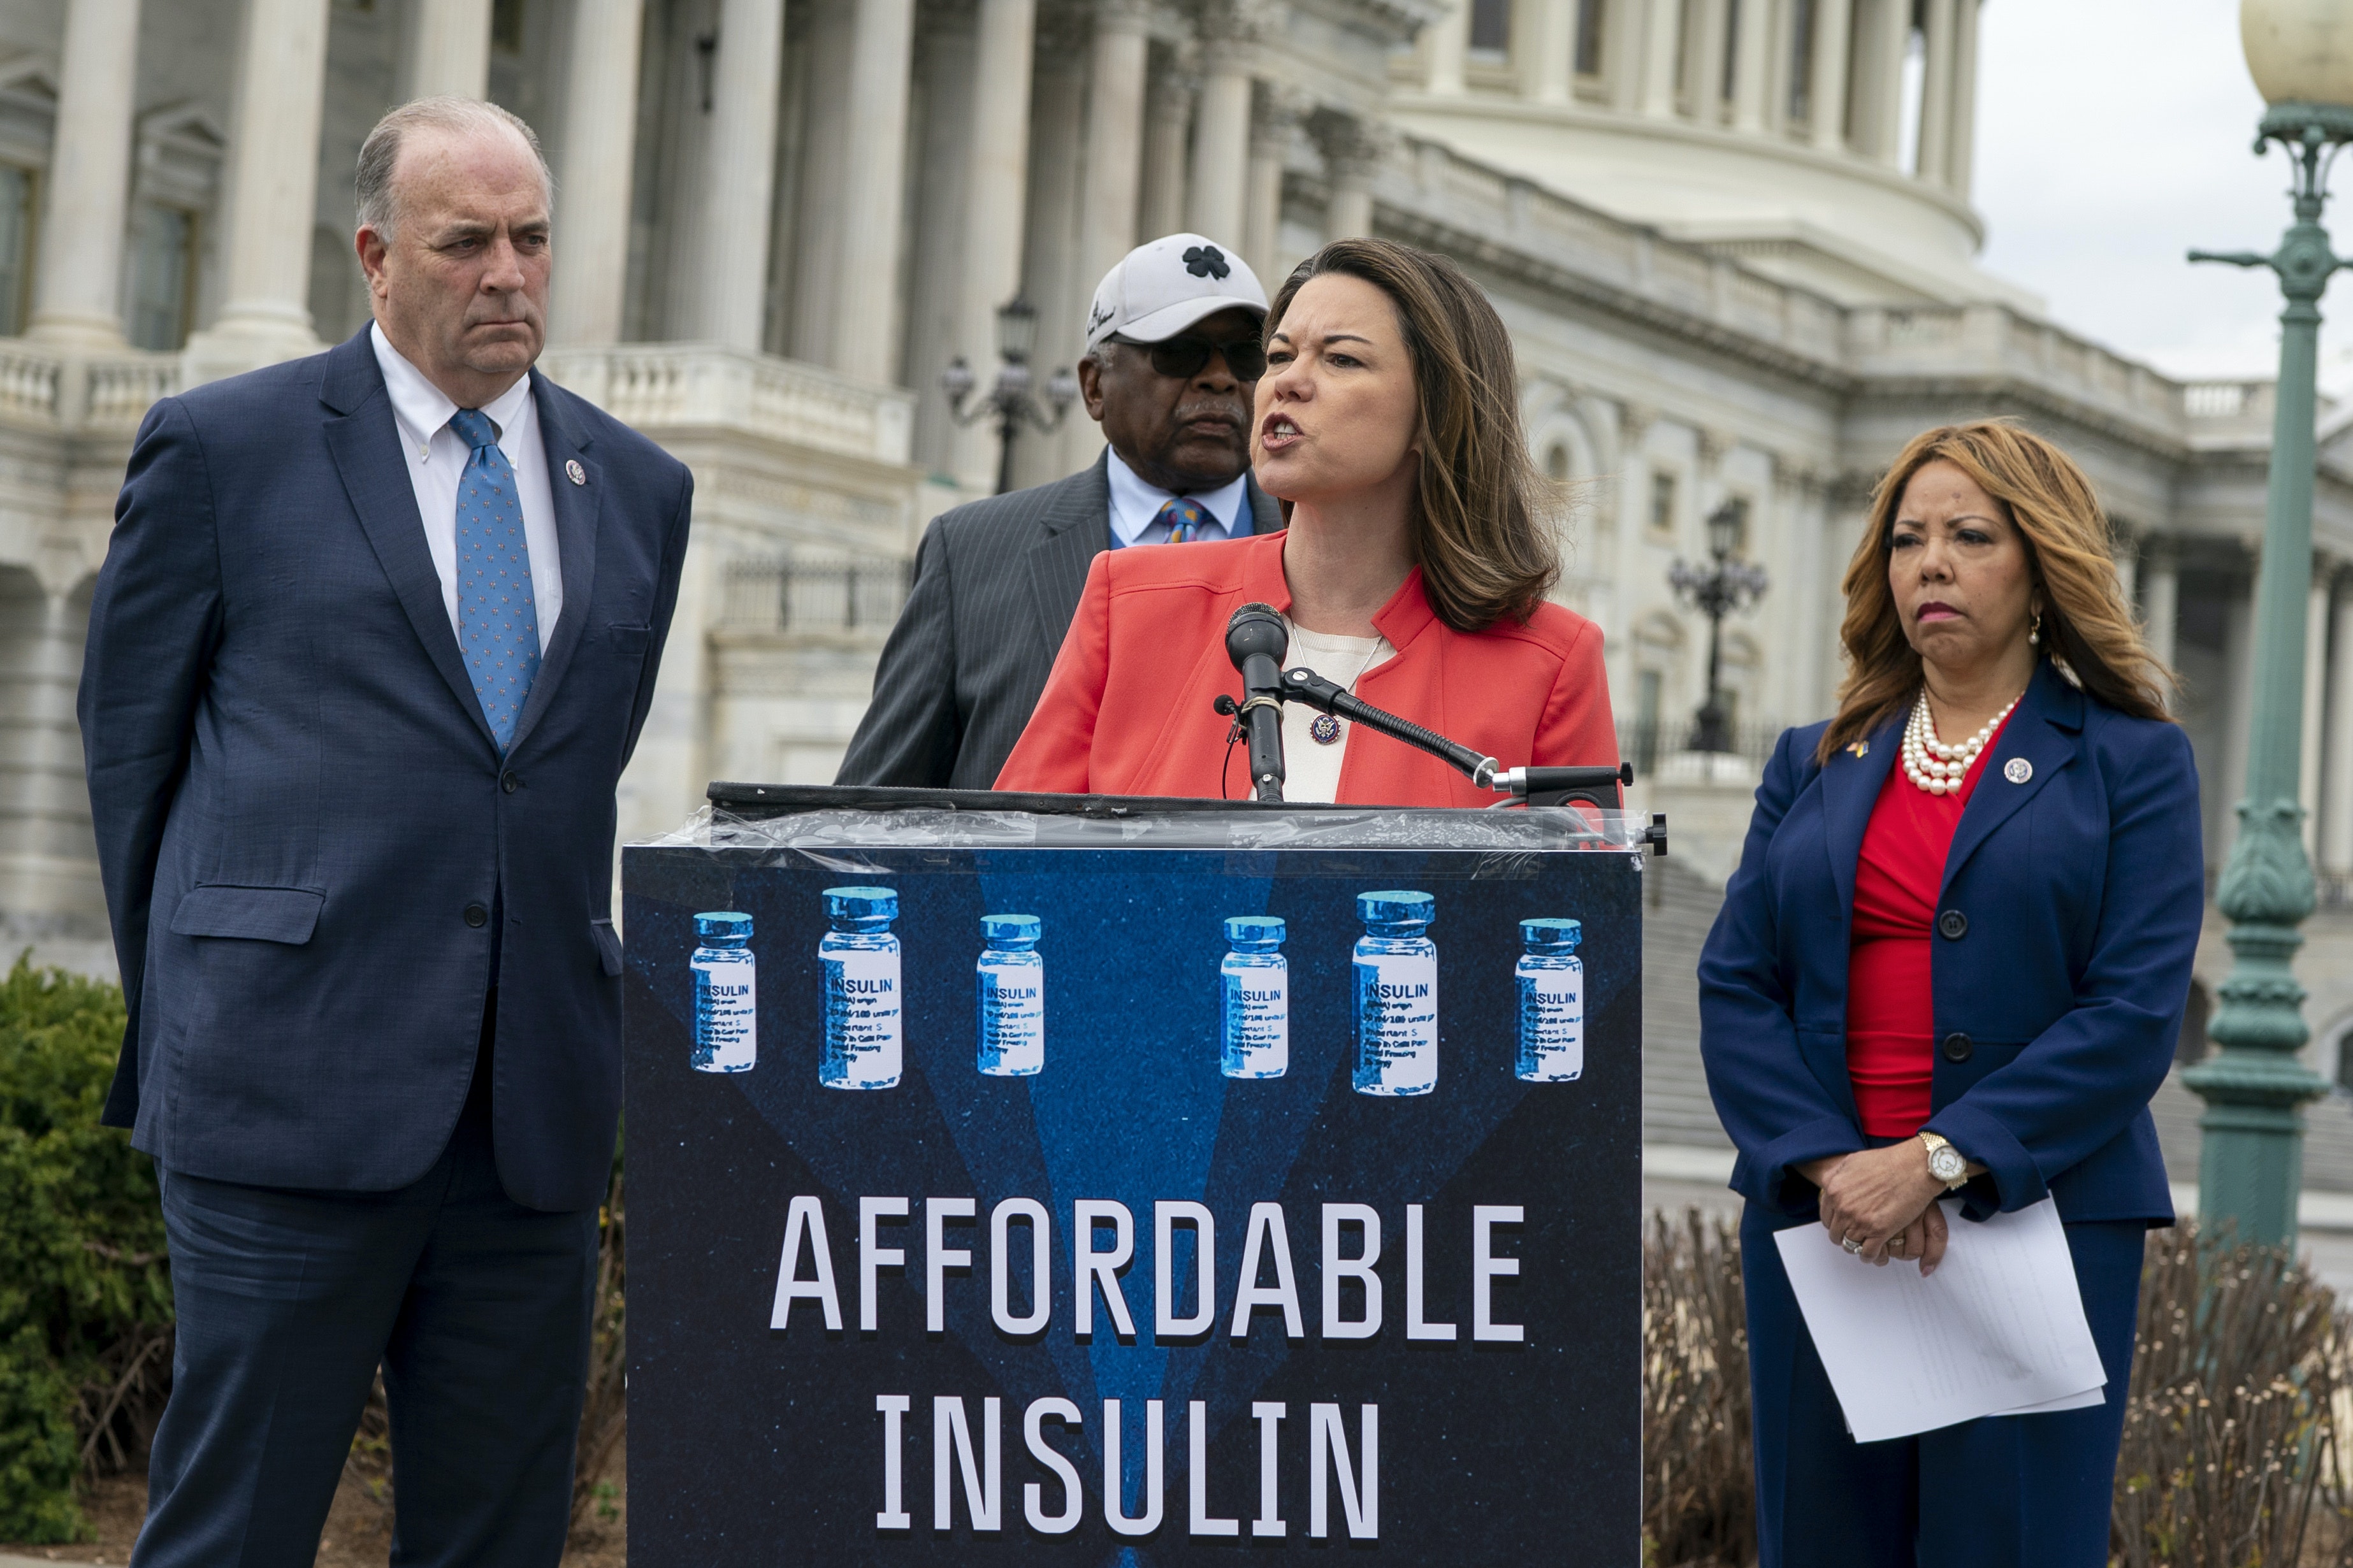 Two women and two men in suits next to an 'affordable insulin' sign in front of the U.S. Capitol building.